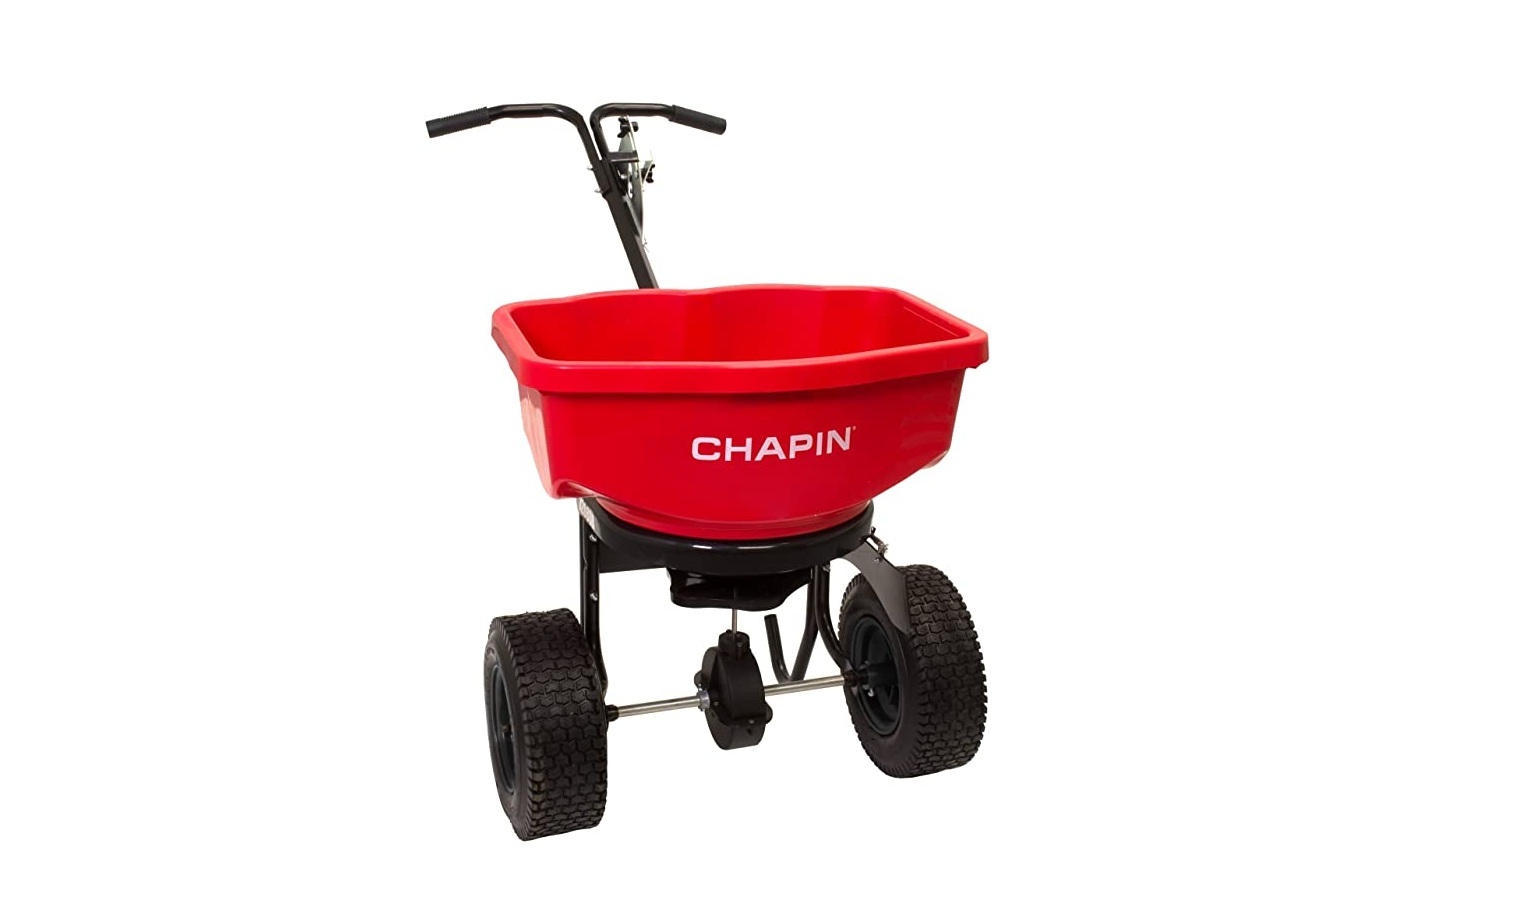 CHAPIN 8000A Residential Lawn Spreader Instruction Manual